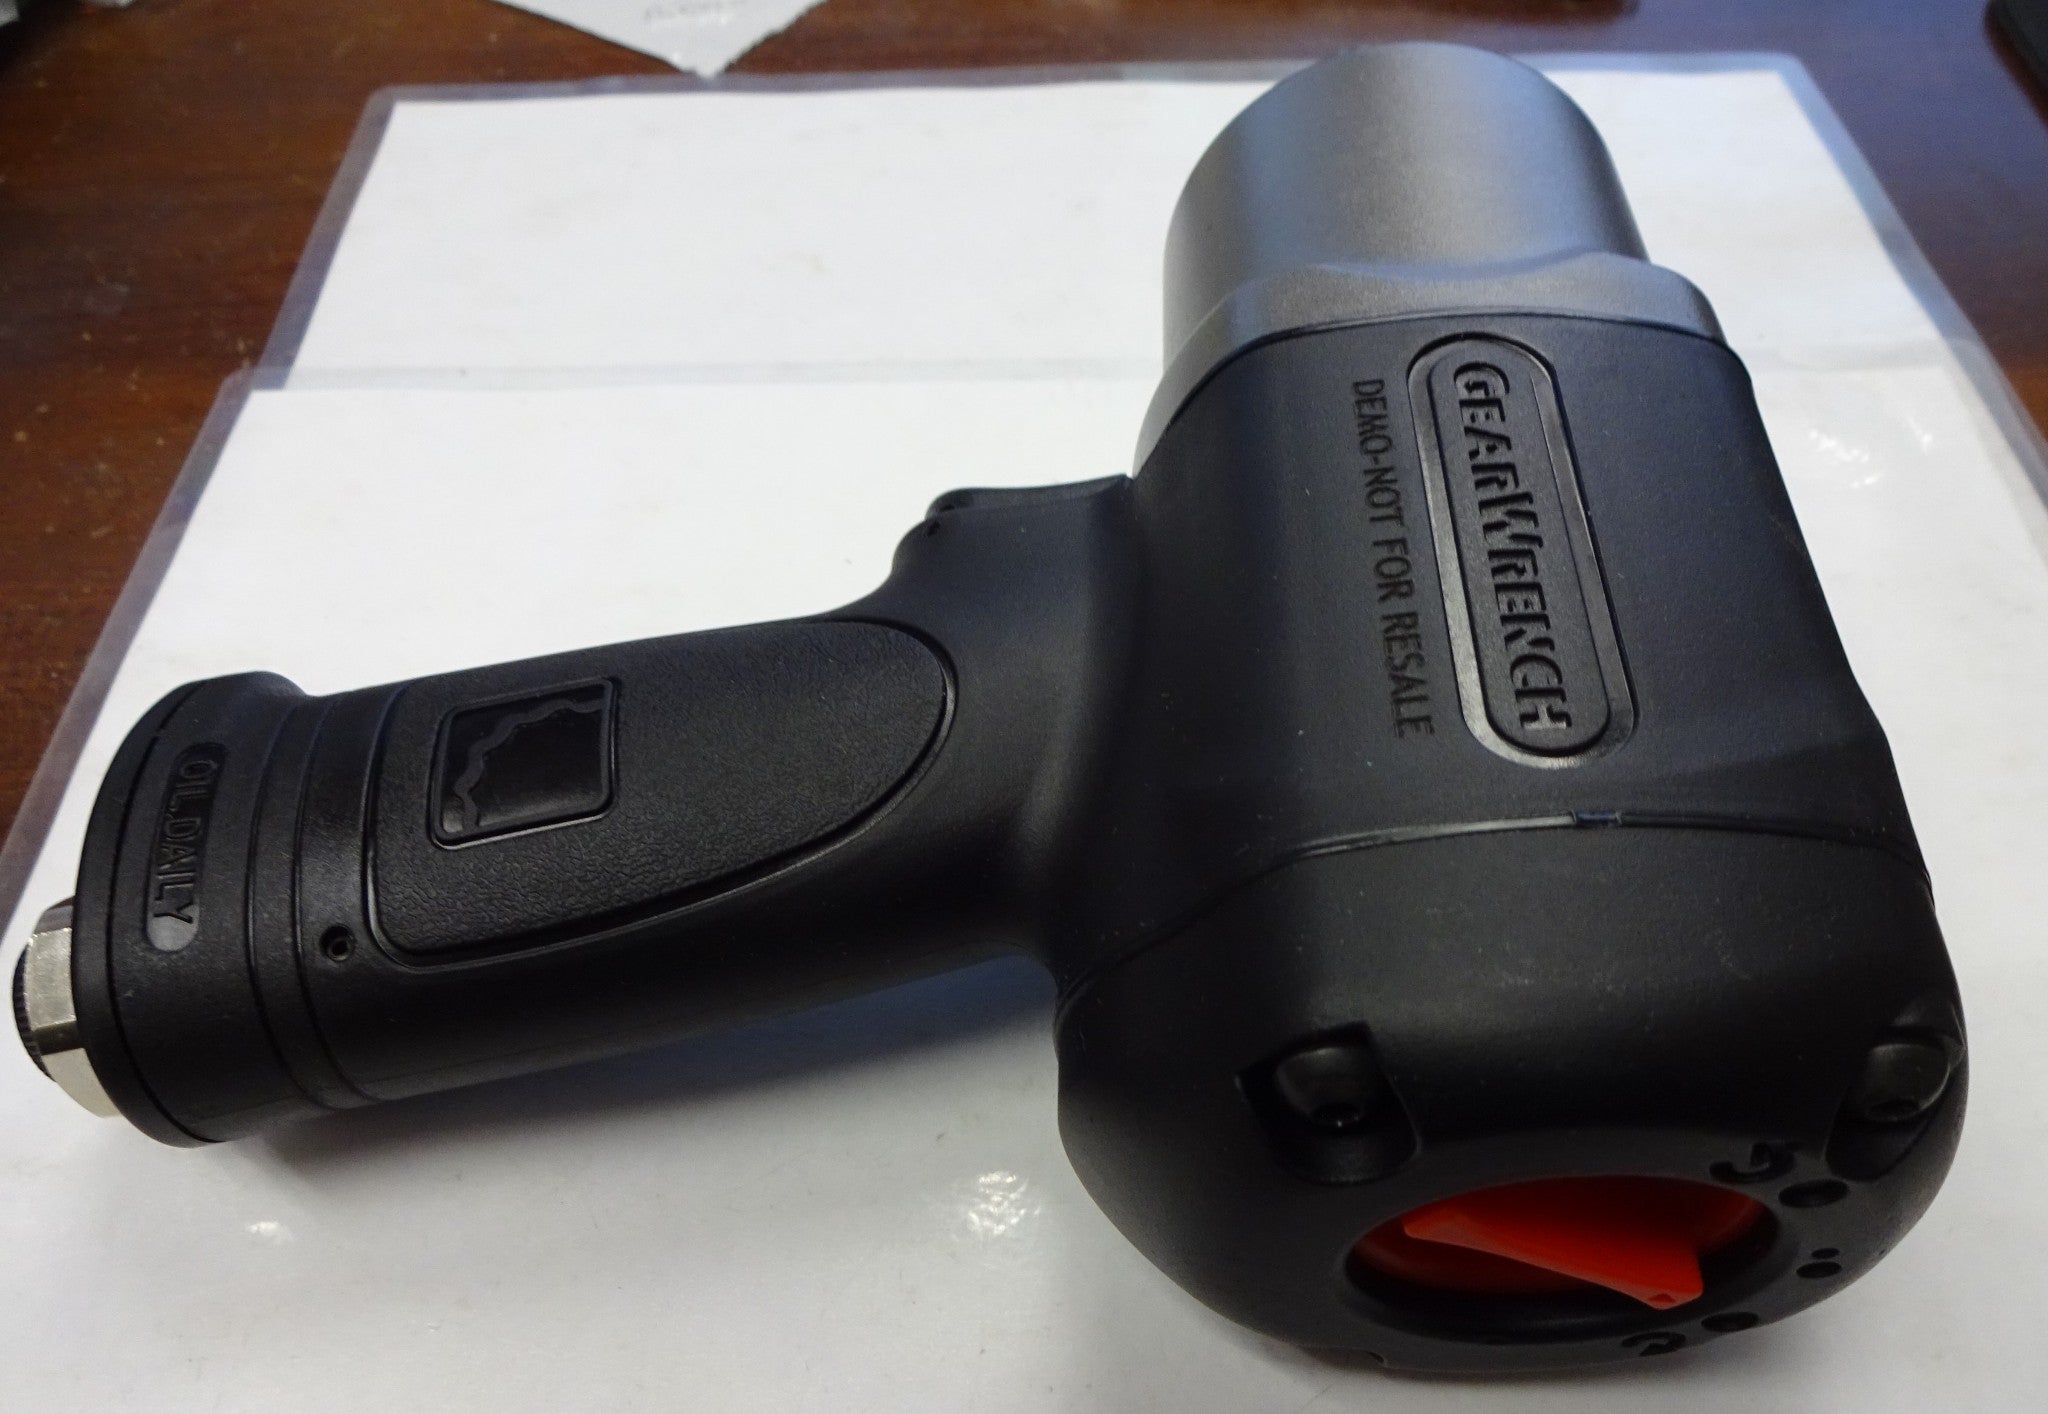 Gearwrench 88050DEMO 1/2" Composite Air Impact Wrench